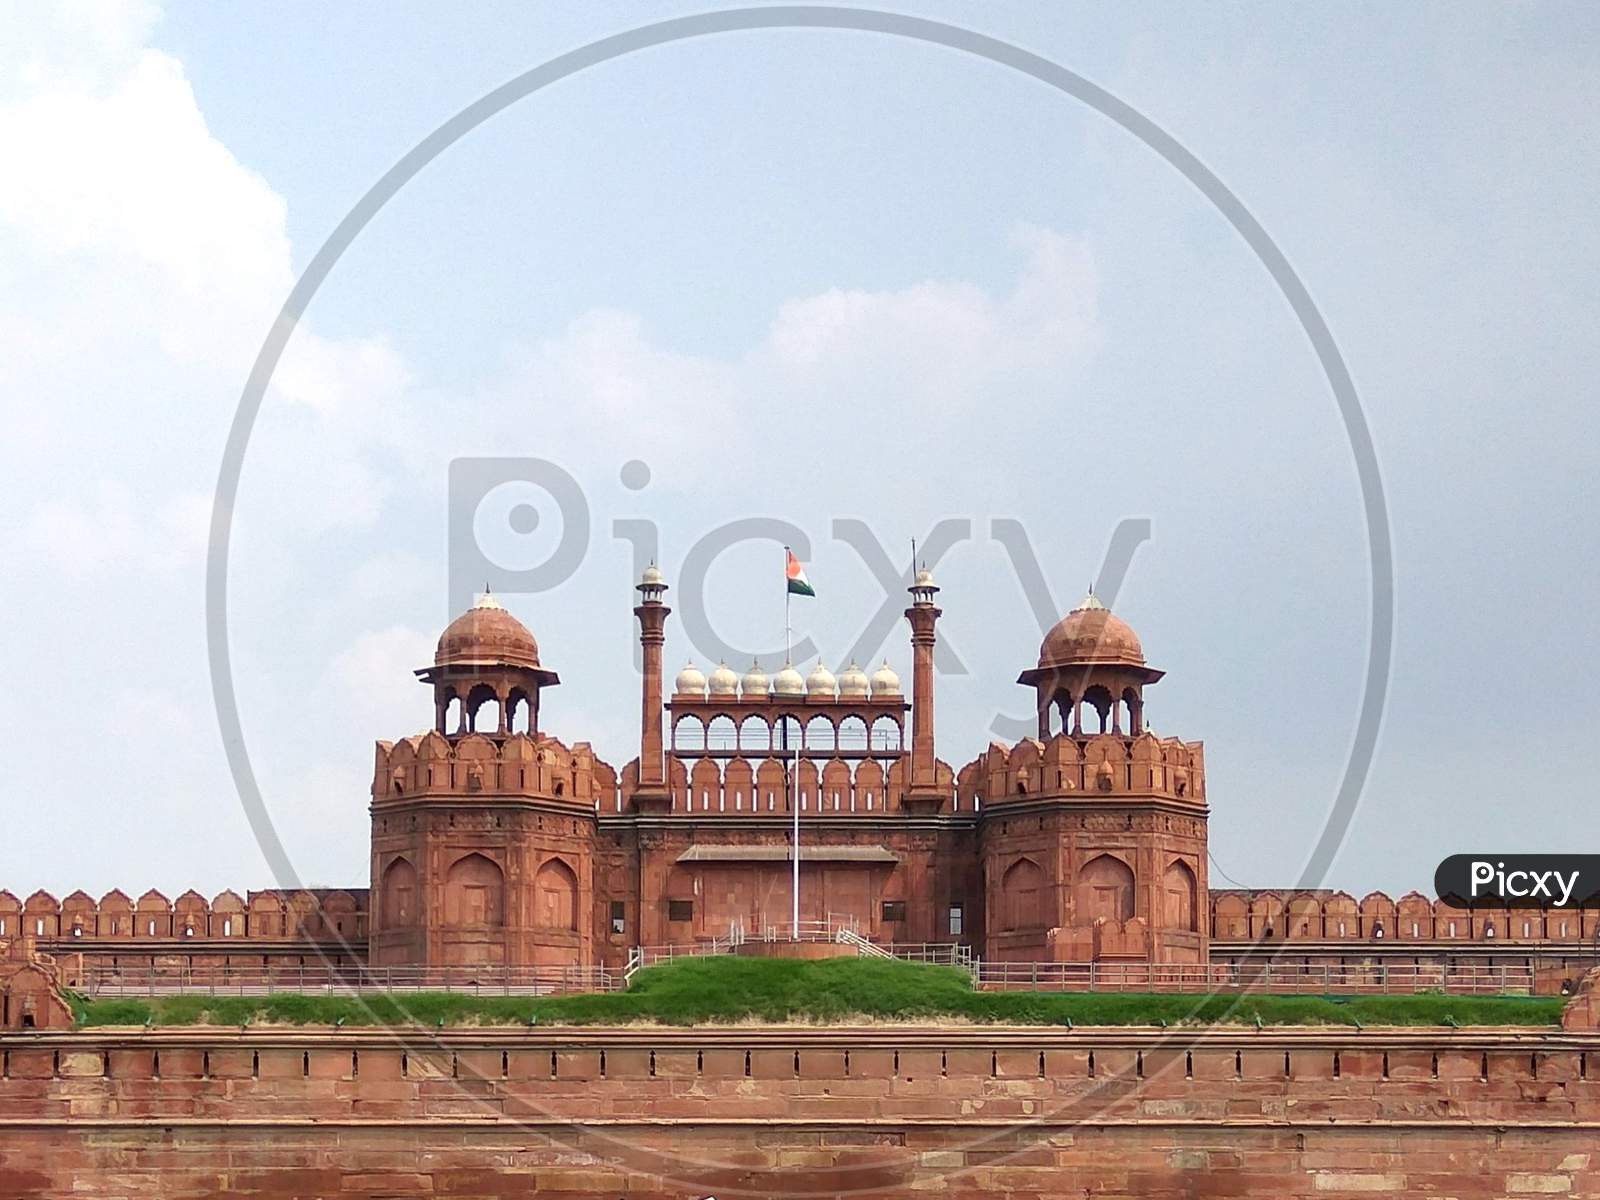 Close view of Red Fort-Lal Qila, Dlehi